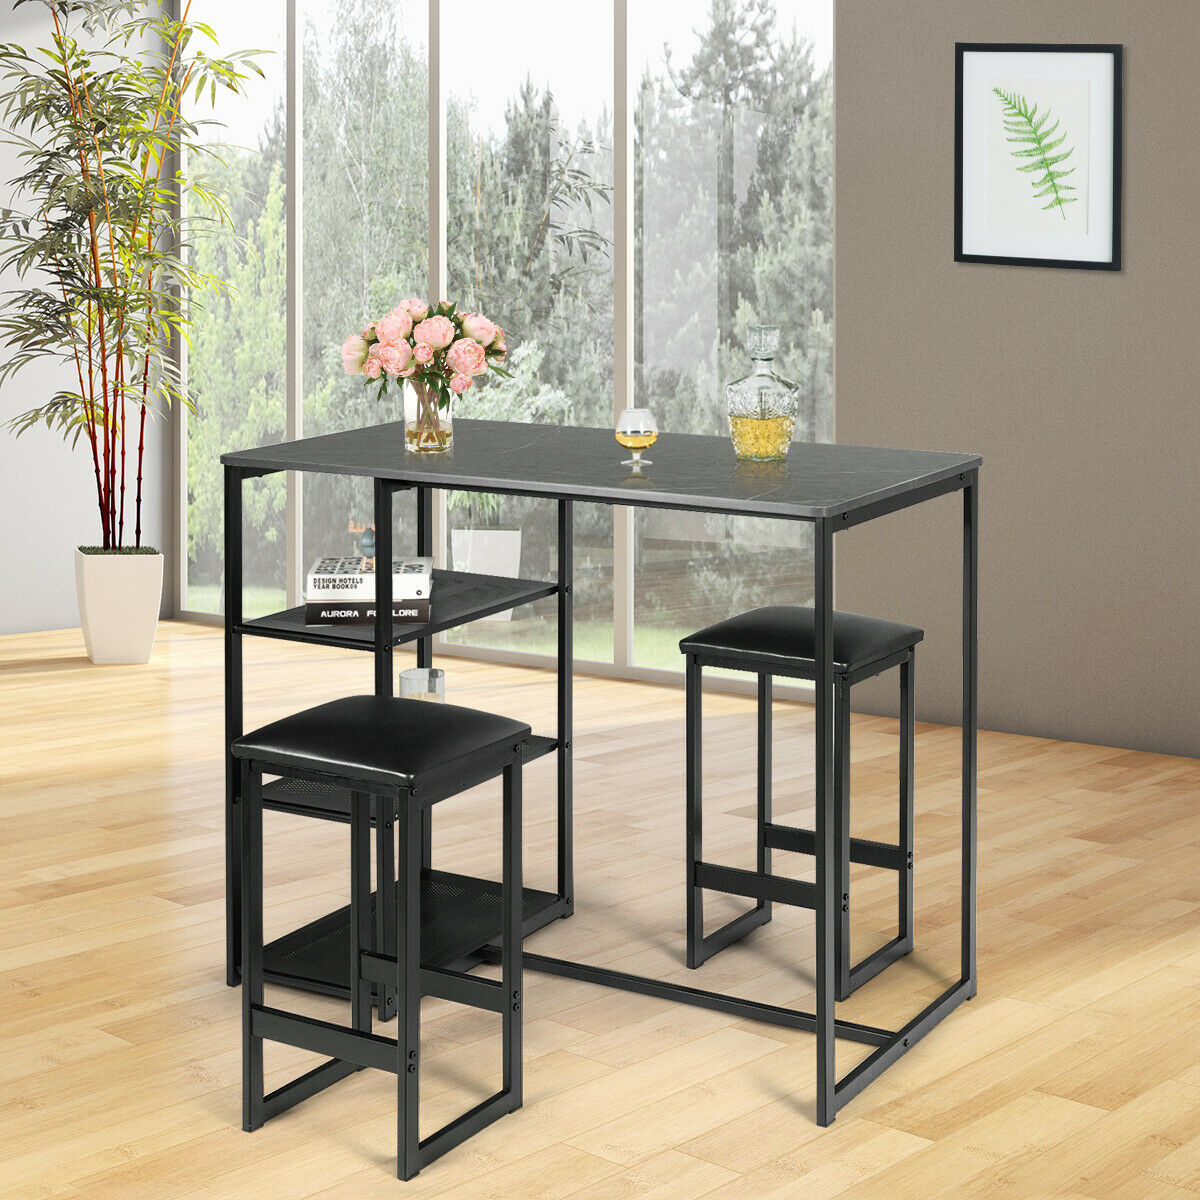 3 Piece Pub Set W/ Faux Marble Top Bar Table And 2 Stools Dining Set Industrial - Black